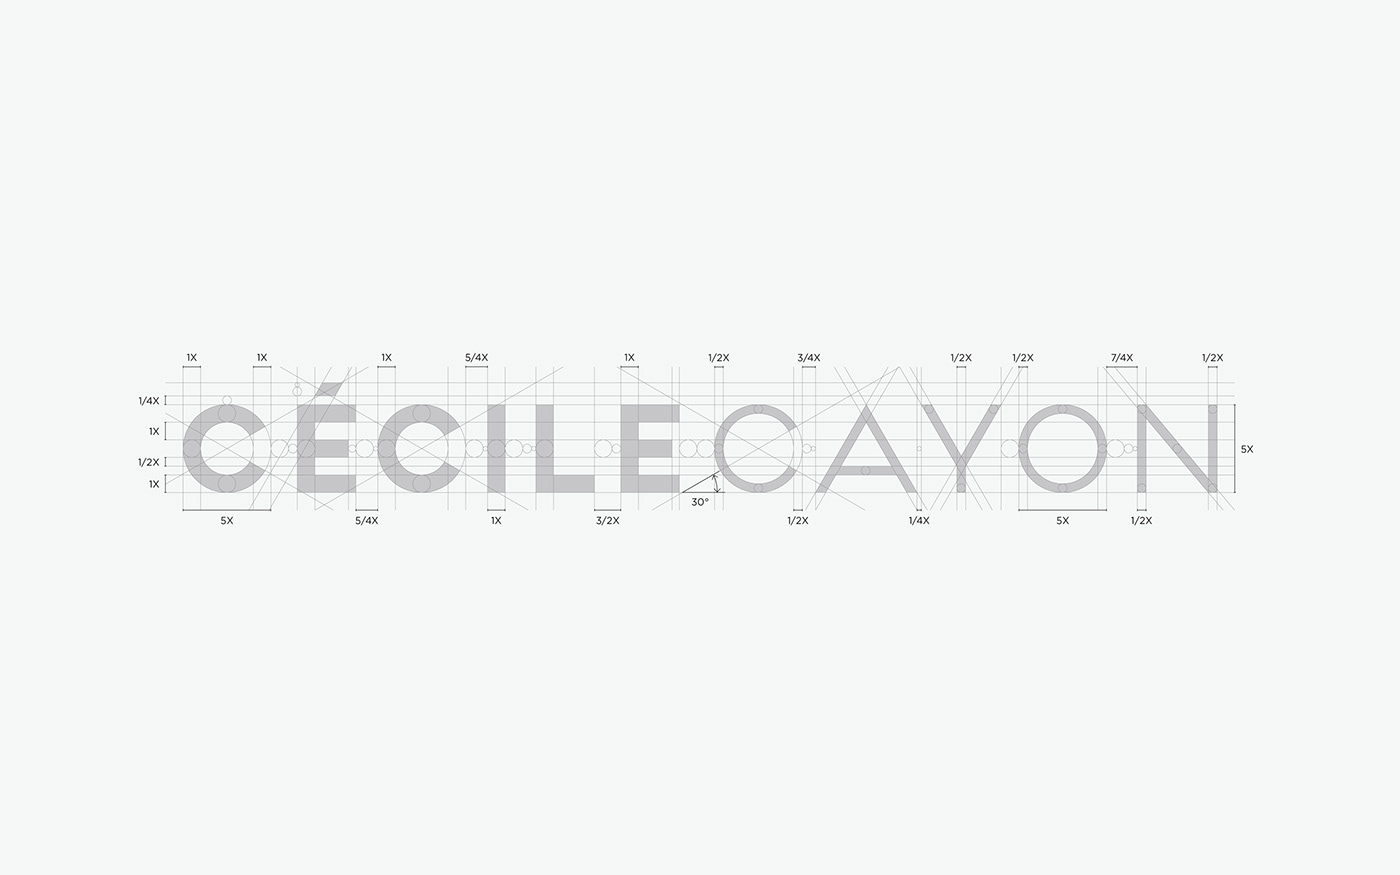 Typography created for a photographer's logo